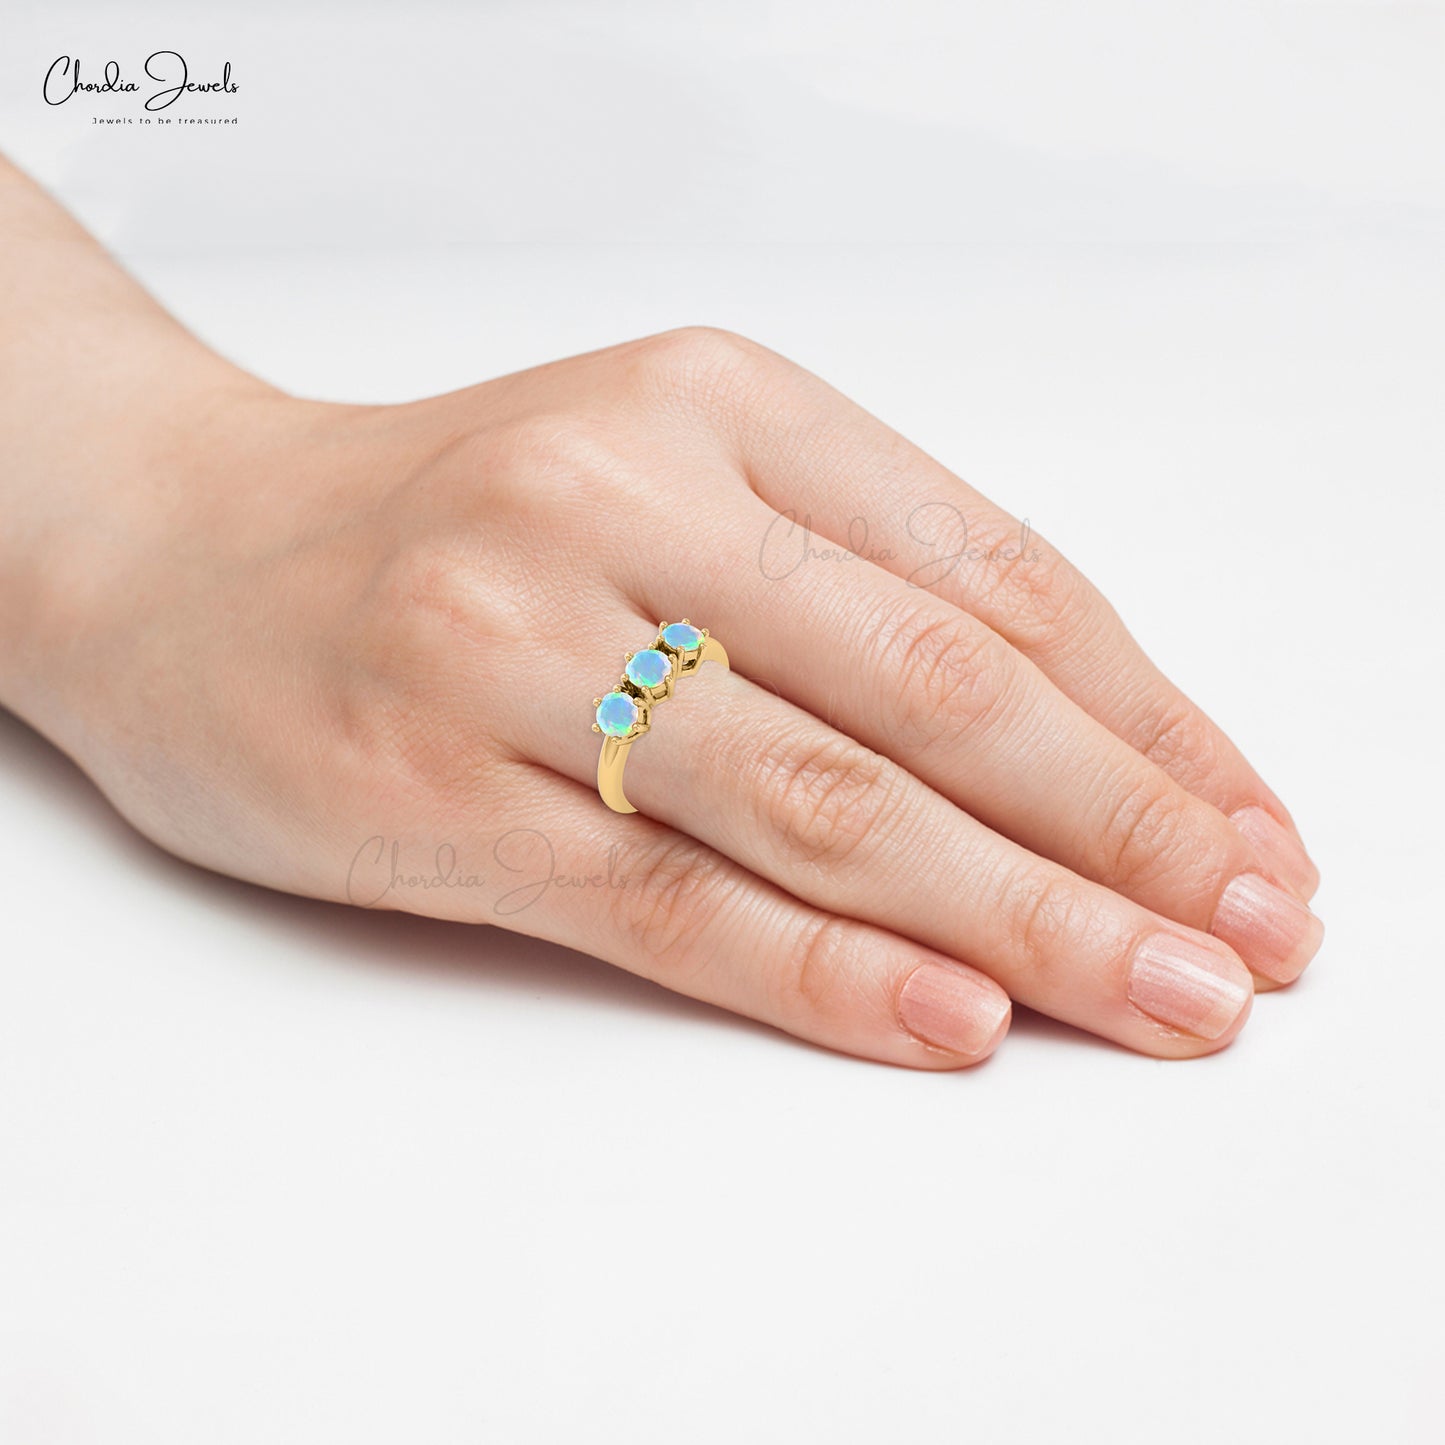 Ethiopian Opal Engagement Ring 14k Real Gold Prong Set Dainty Ring 4mm Round Cut Gemstone Vintage Fine Jewelry For Her